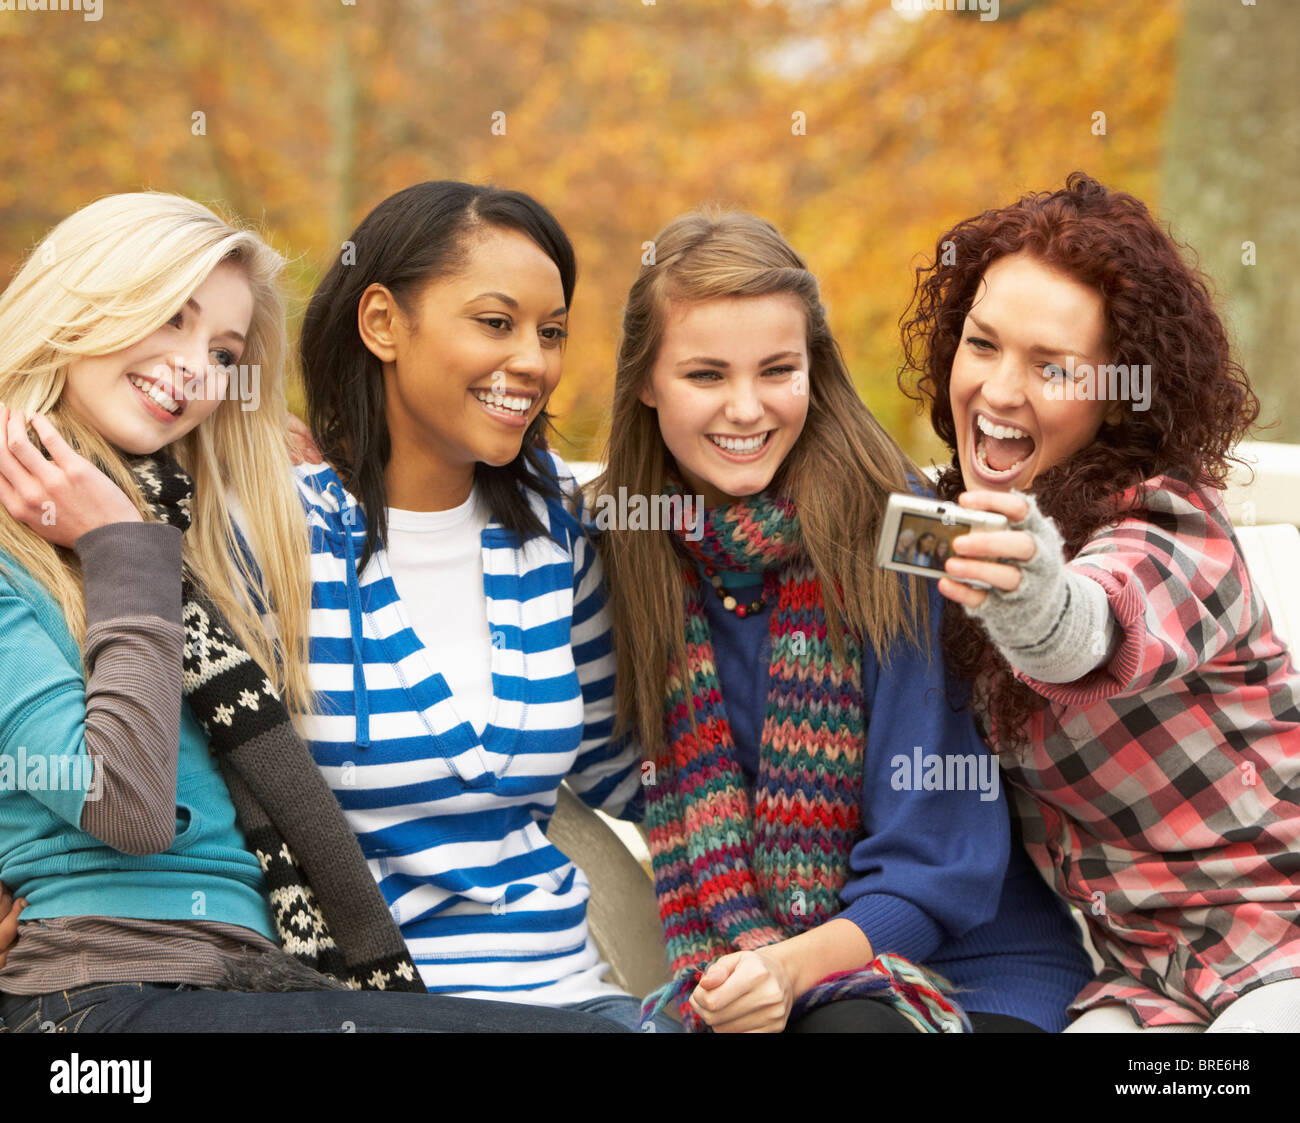 Group Of Four Teenage Girls Taking Picture With Camera Sitting On Bench In Autumn Park Stock Photo